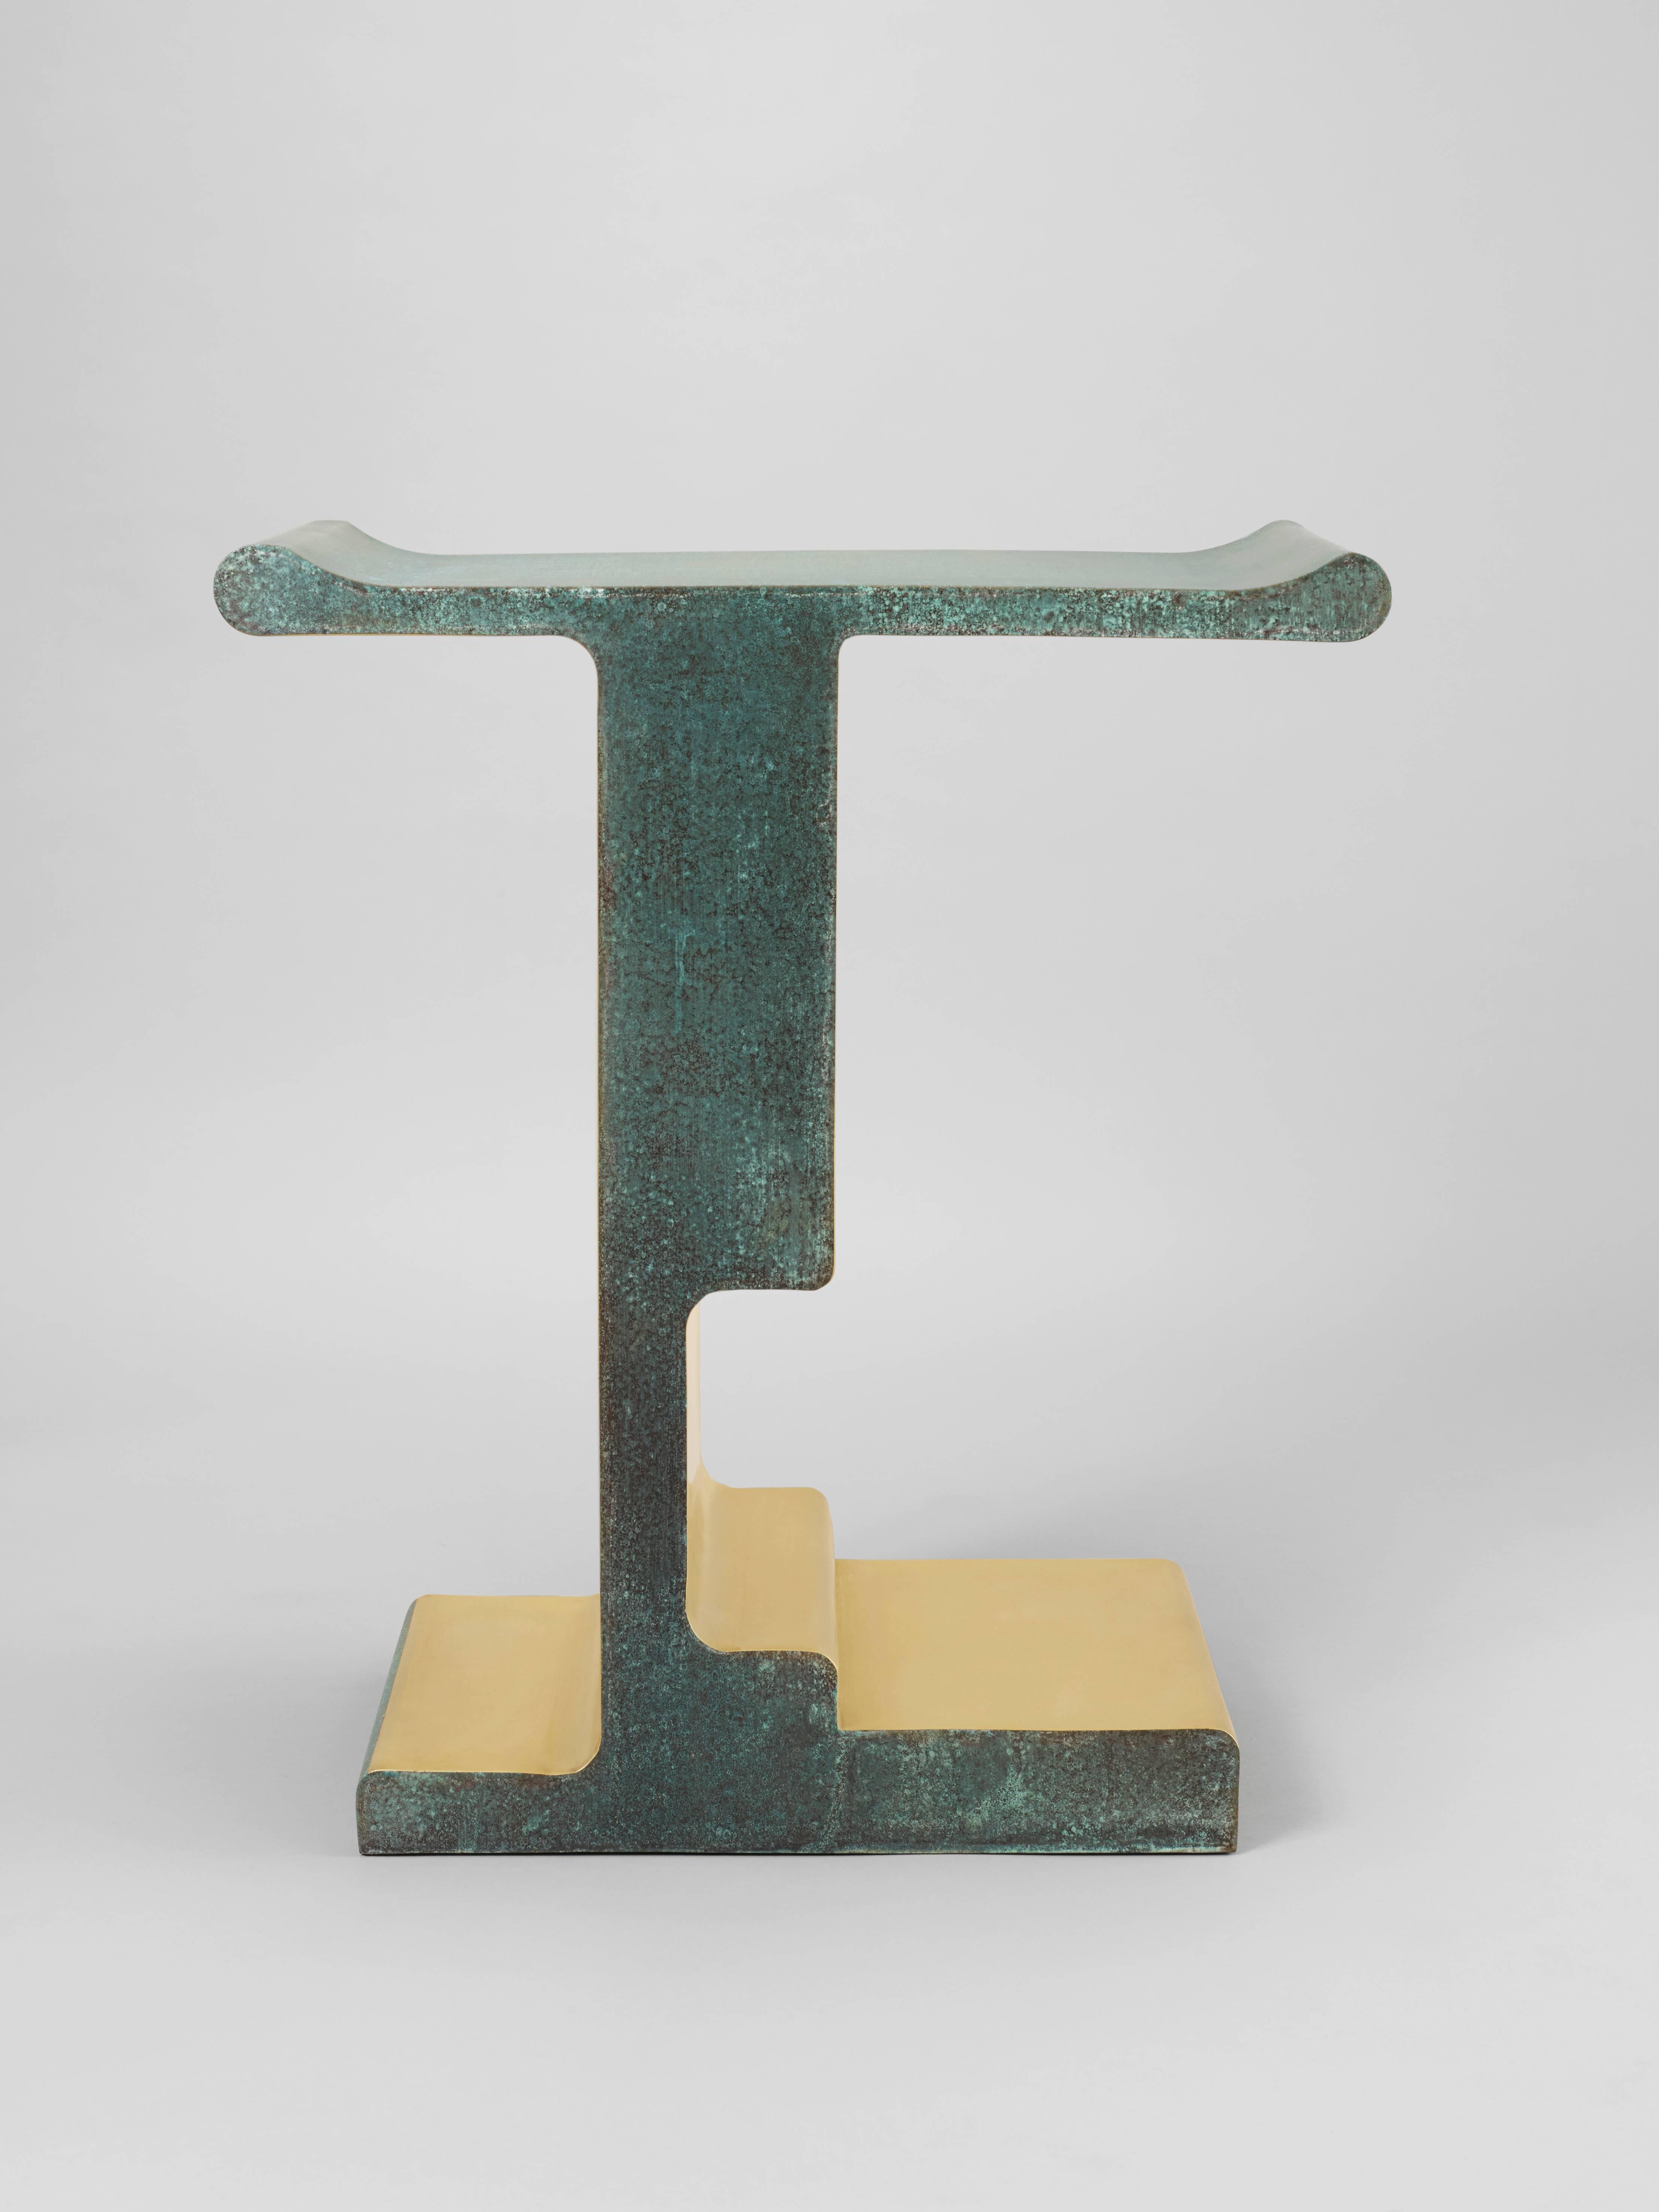 XiangSheng I' Side Table #1 combines brushed bronze with a refined champagne color and oxidized bronze with a deep Etruscan green patina. This collectible design is part of the ‘XiangSheng’ furniture collection by much acclaimed duo Studio MVW.